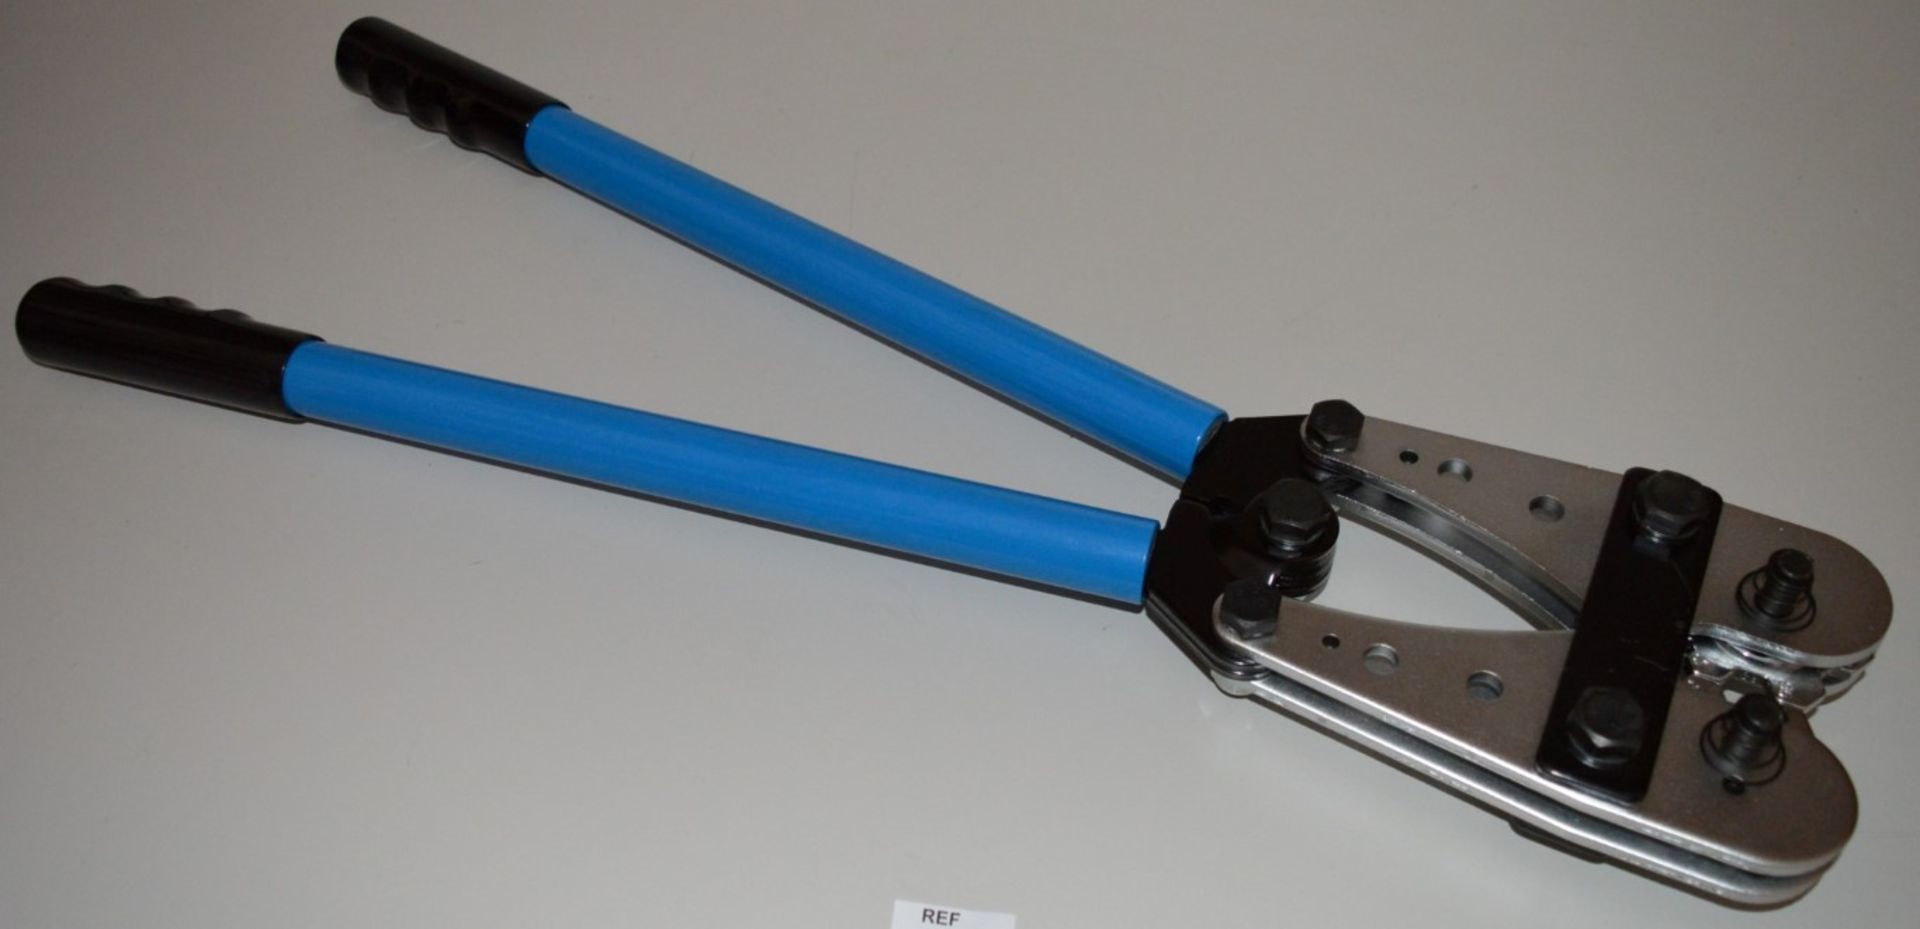 1 x HD Copper Tube Terminal Crimp Tool With Adjustable Hex - 62cm Length - XXX Branded - New and - Image 3 of 7